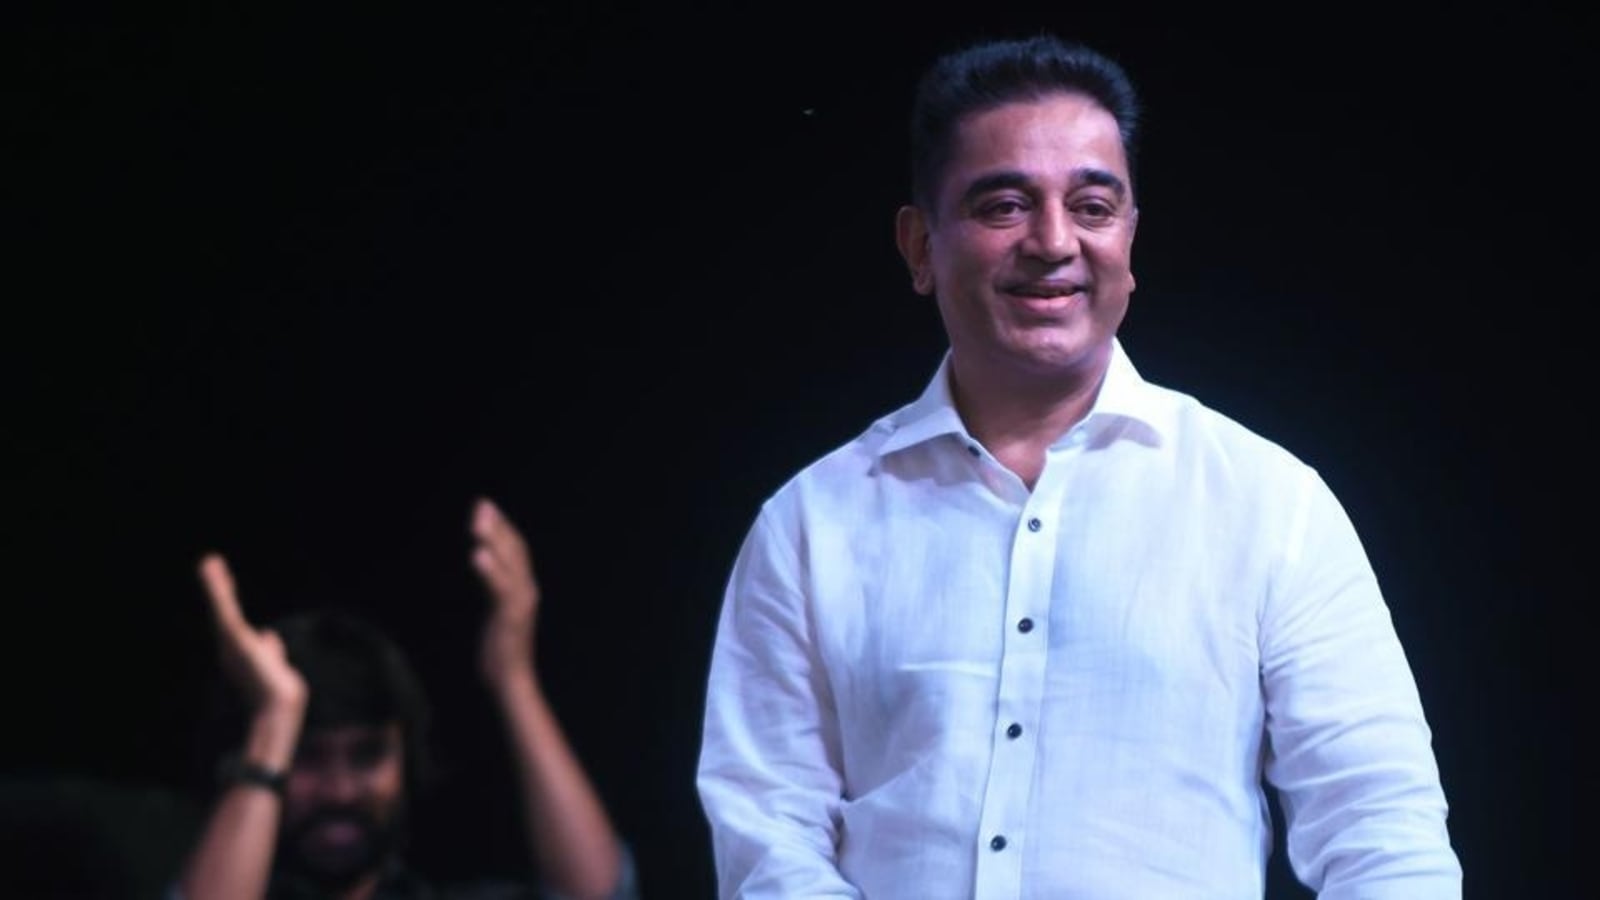 Kamal Hassan discharged from Chennai hospital hours after being admitted for fever, advised rest